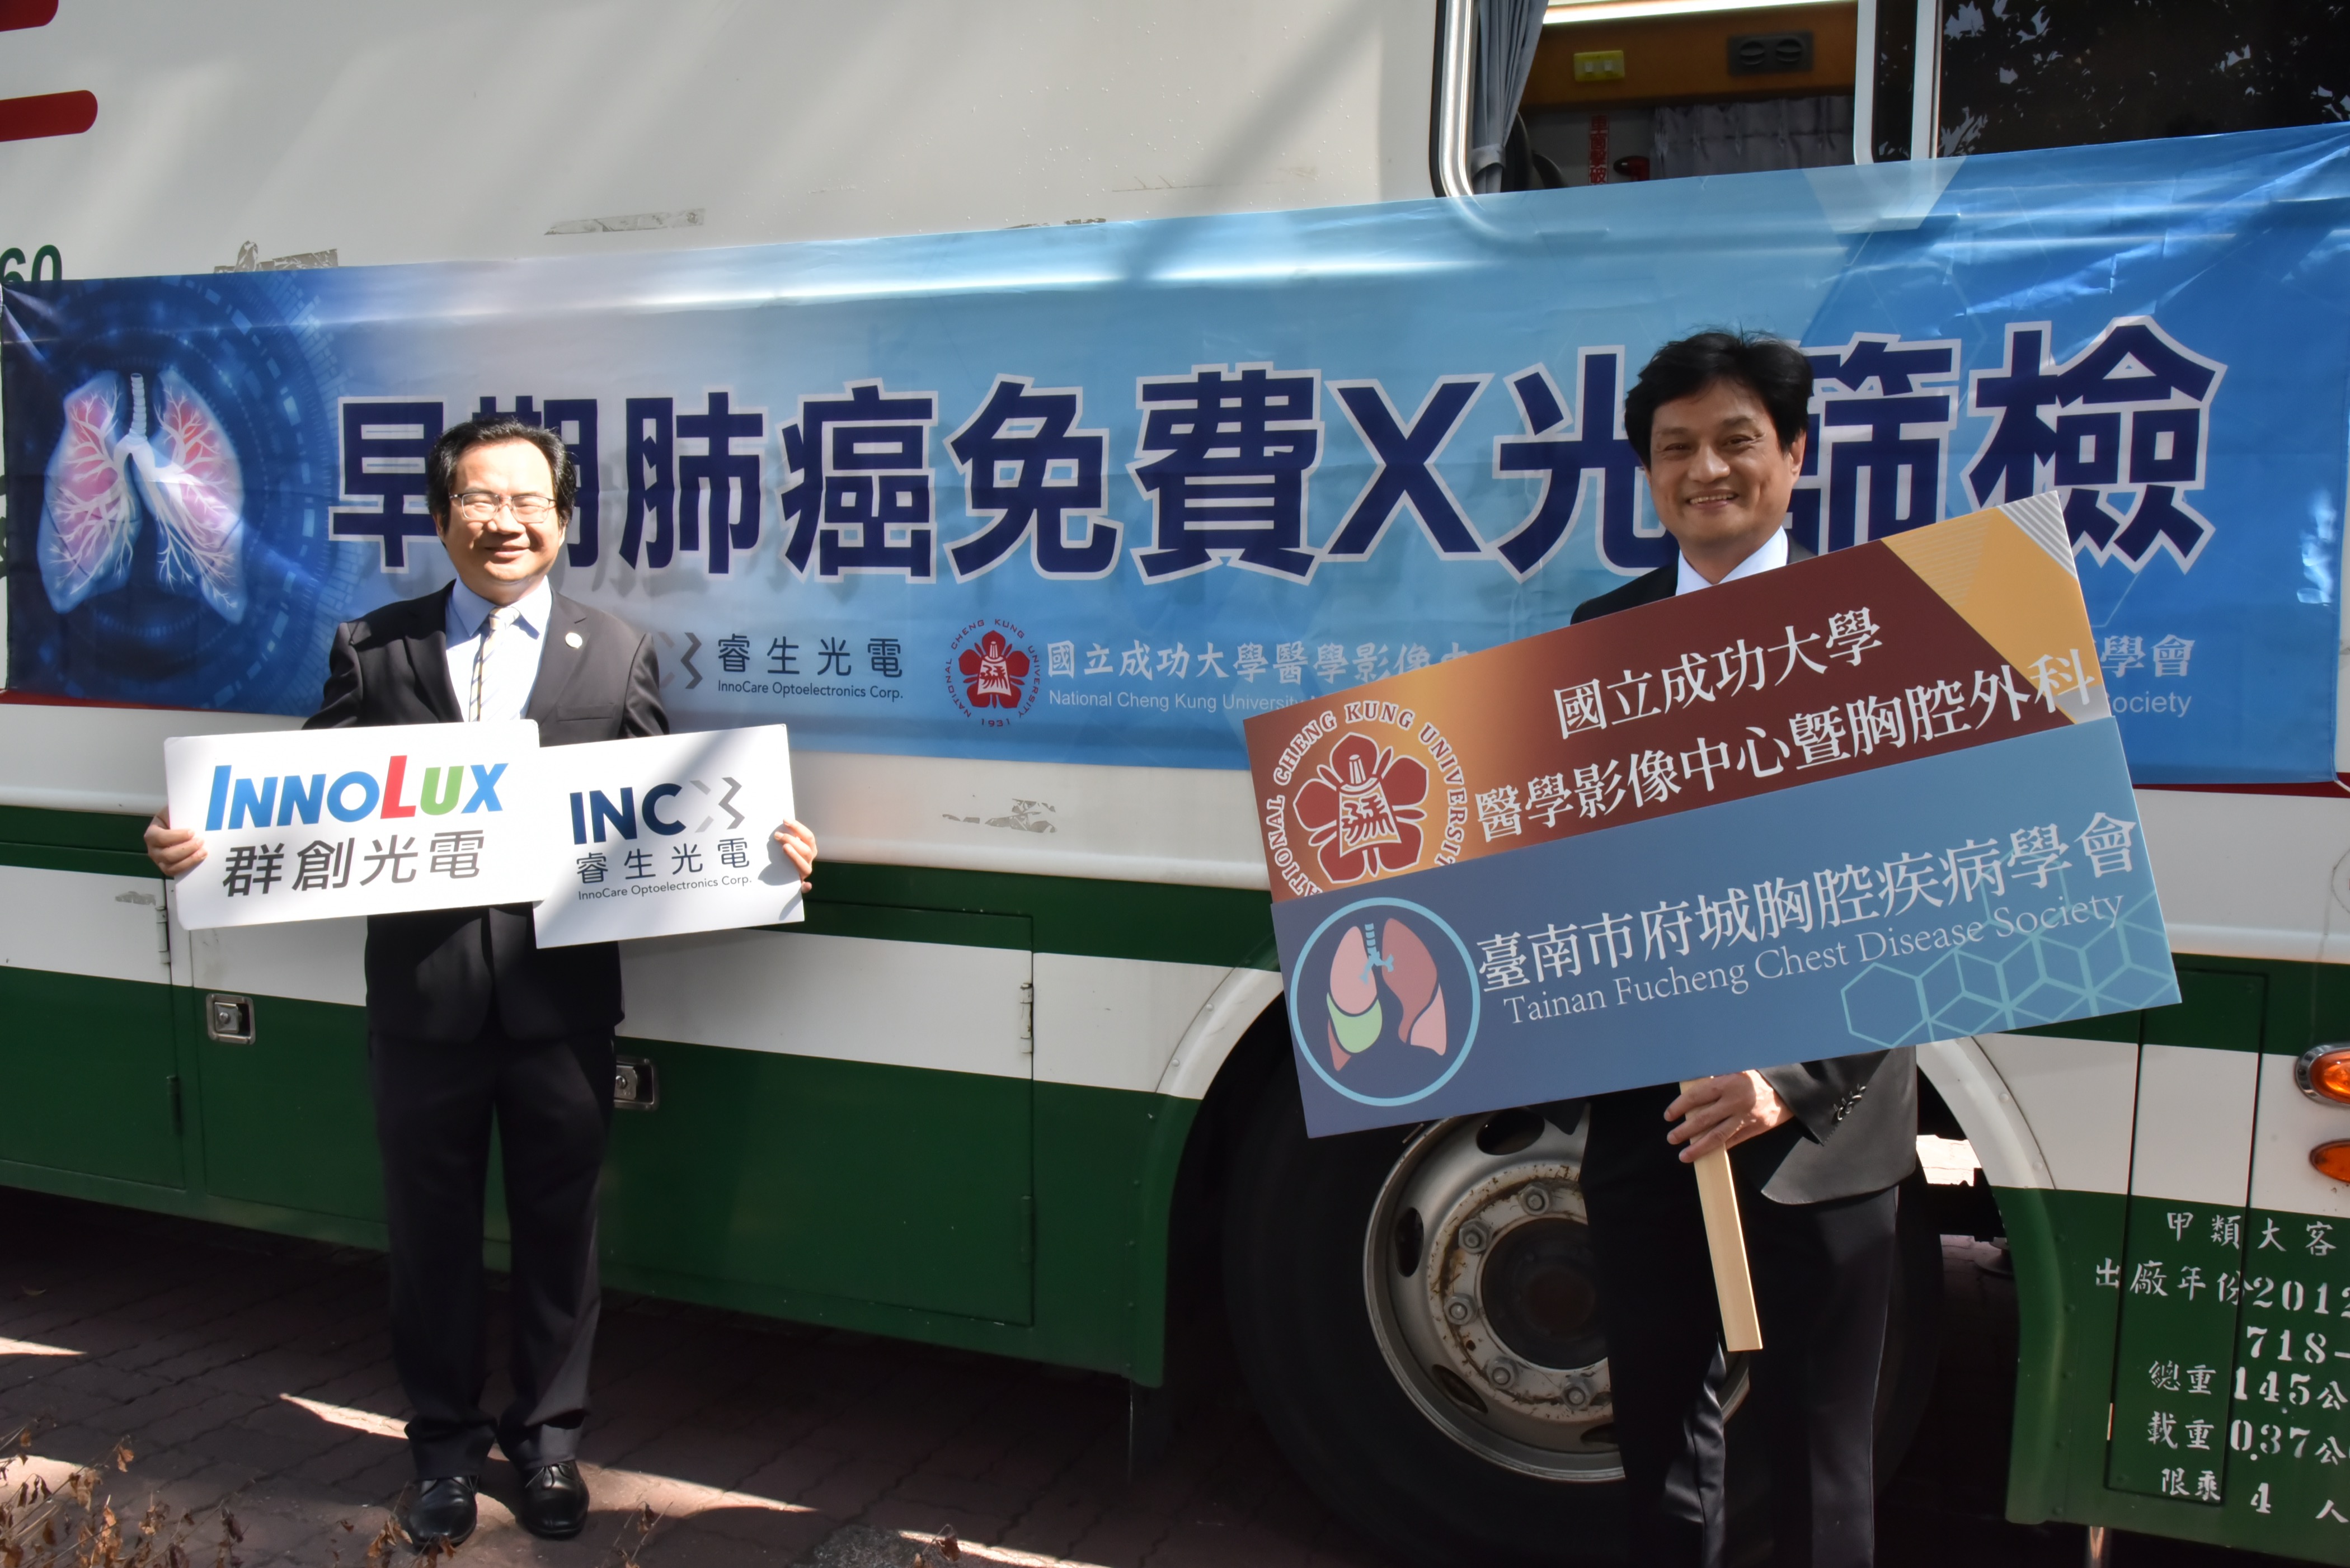 The lung cancer screening activity of Homeless in Tainan city